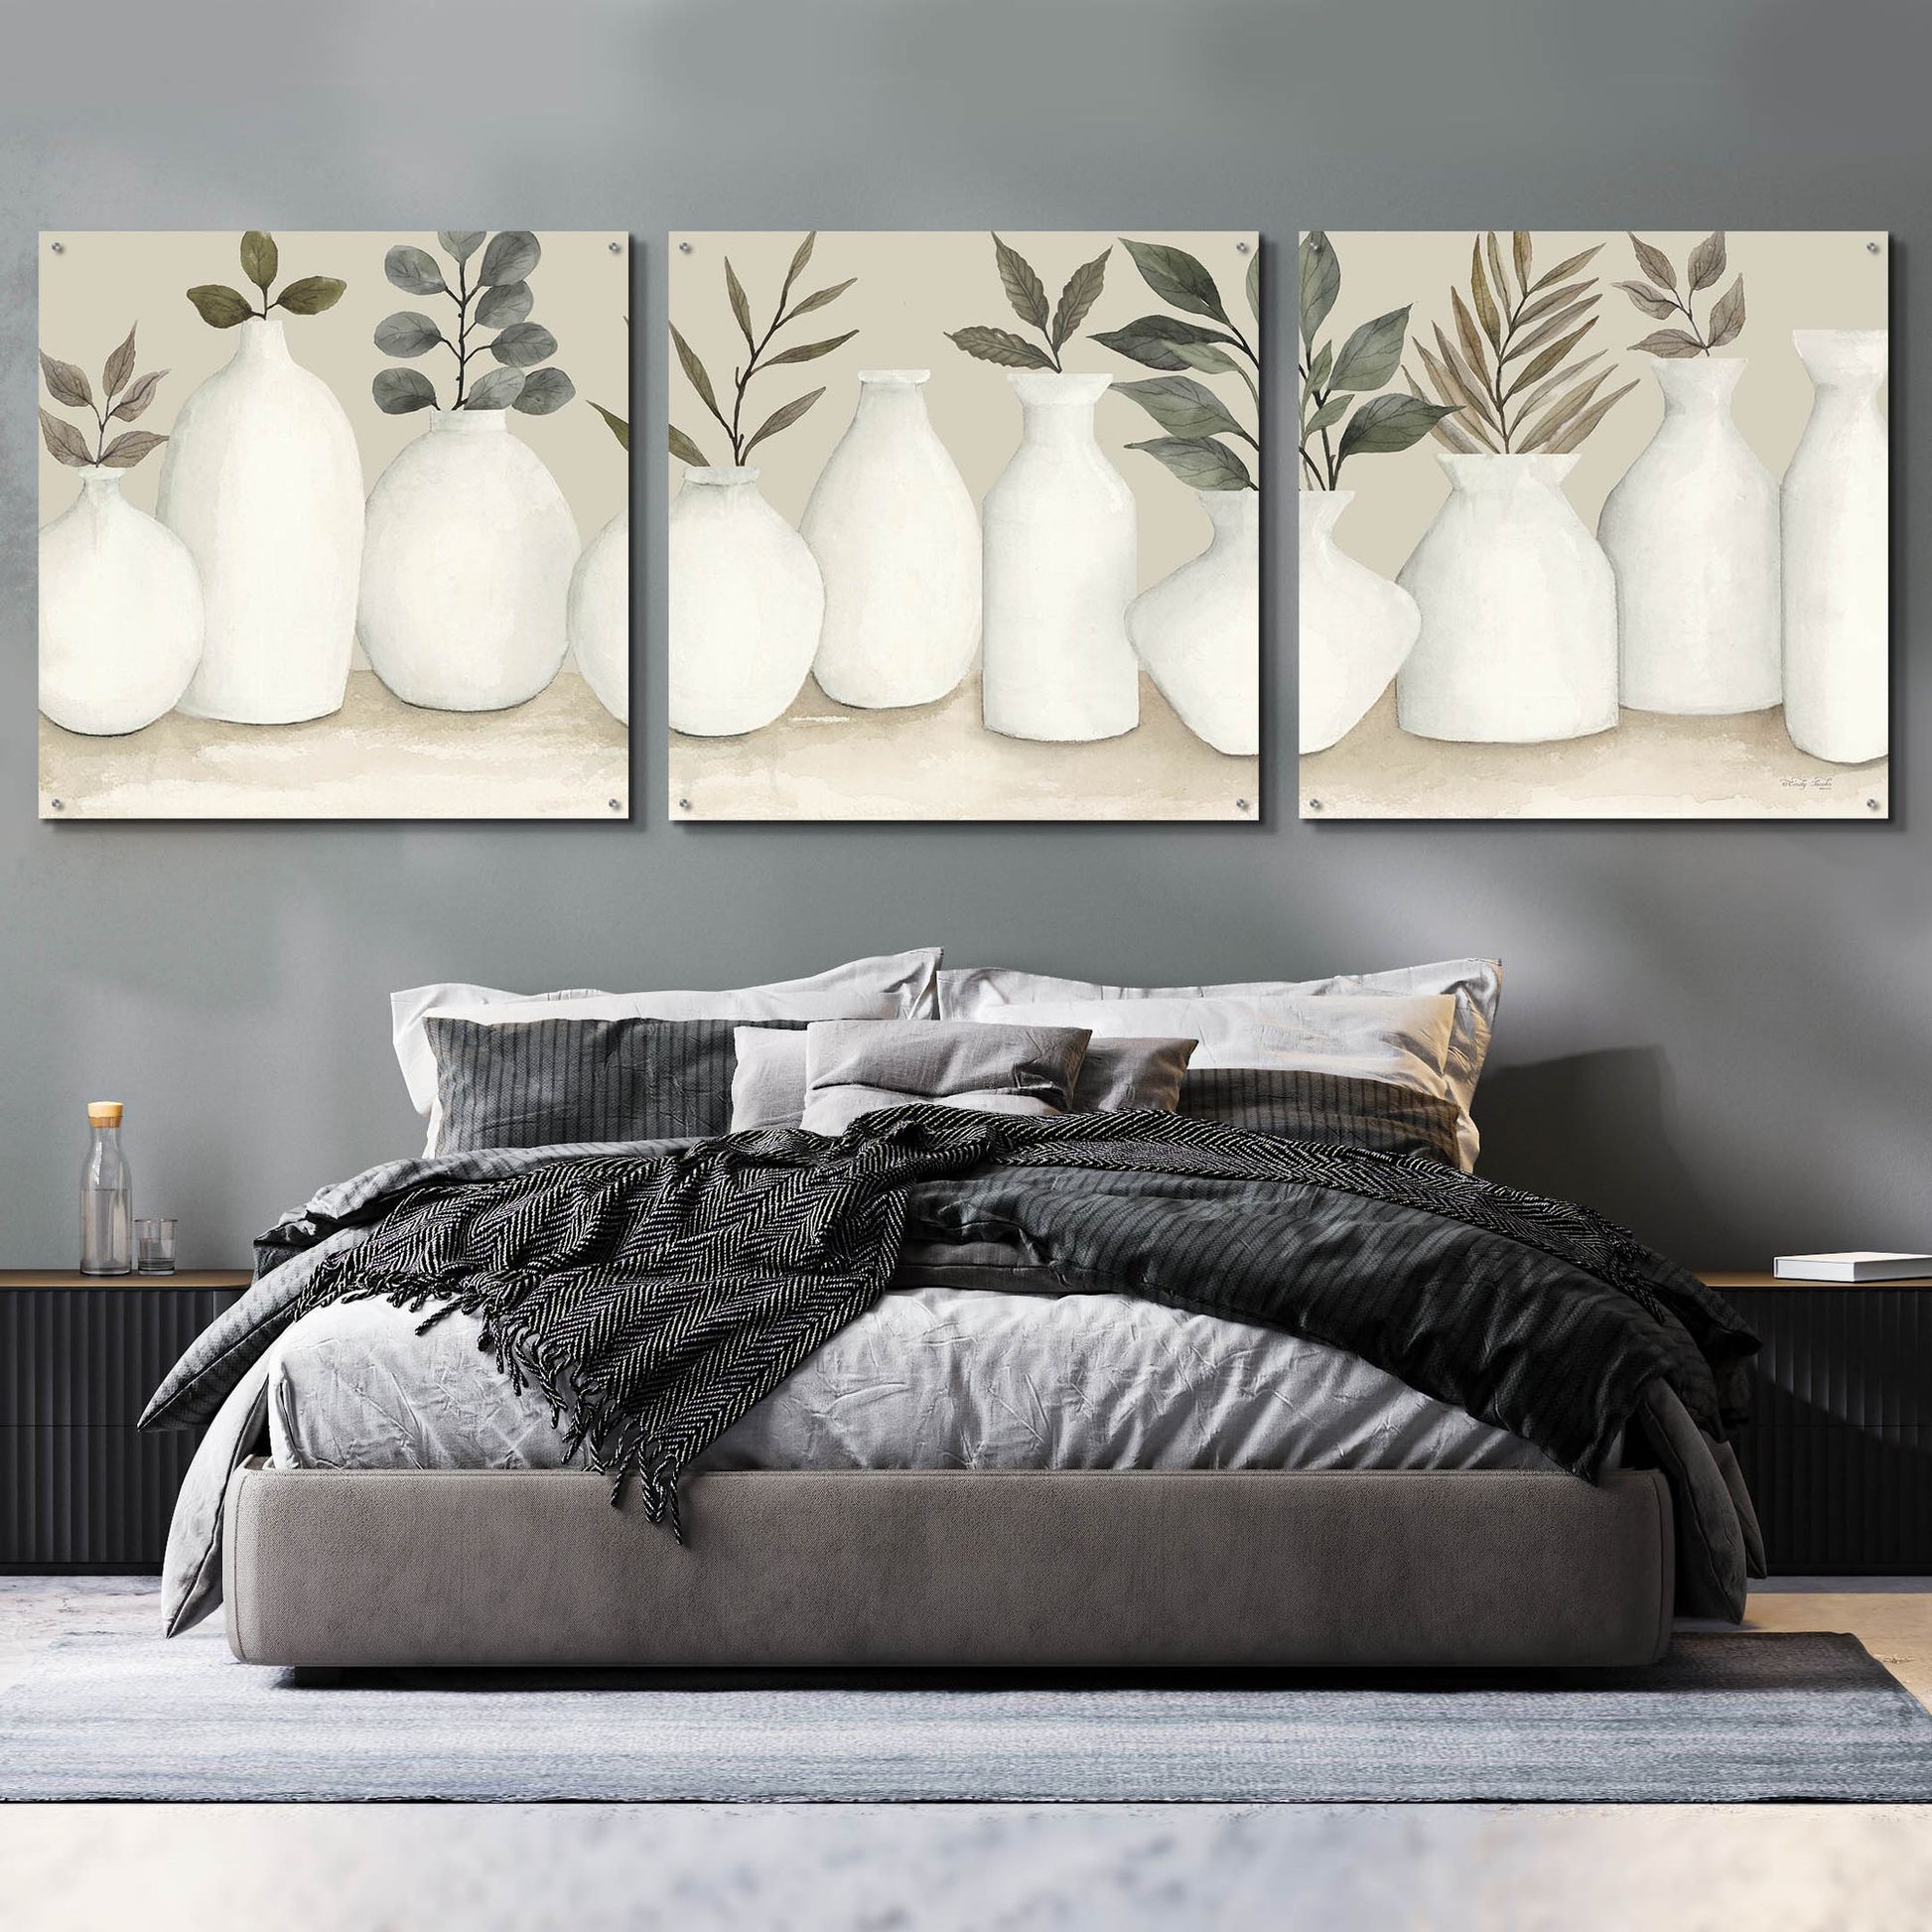 Epic Art 'Ivory Vases in a Row' by Cindy Jacobs, Acrylic Glass Wall Art, 3 Piece Set,108x36